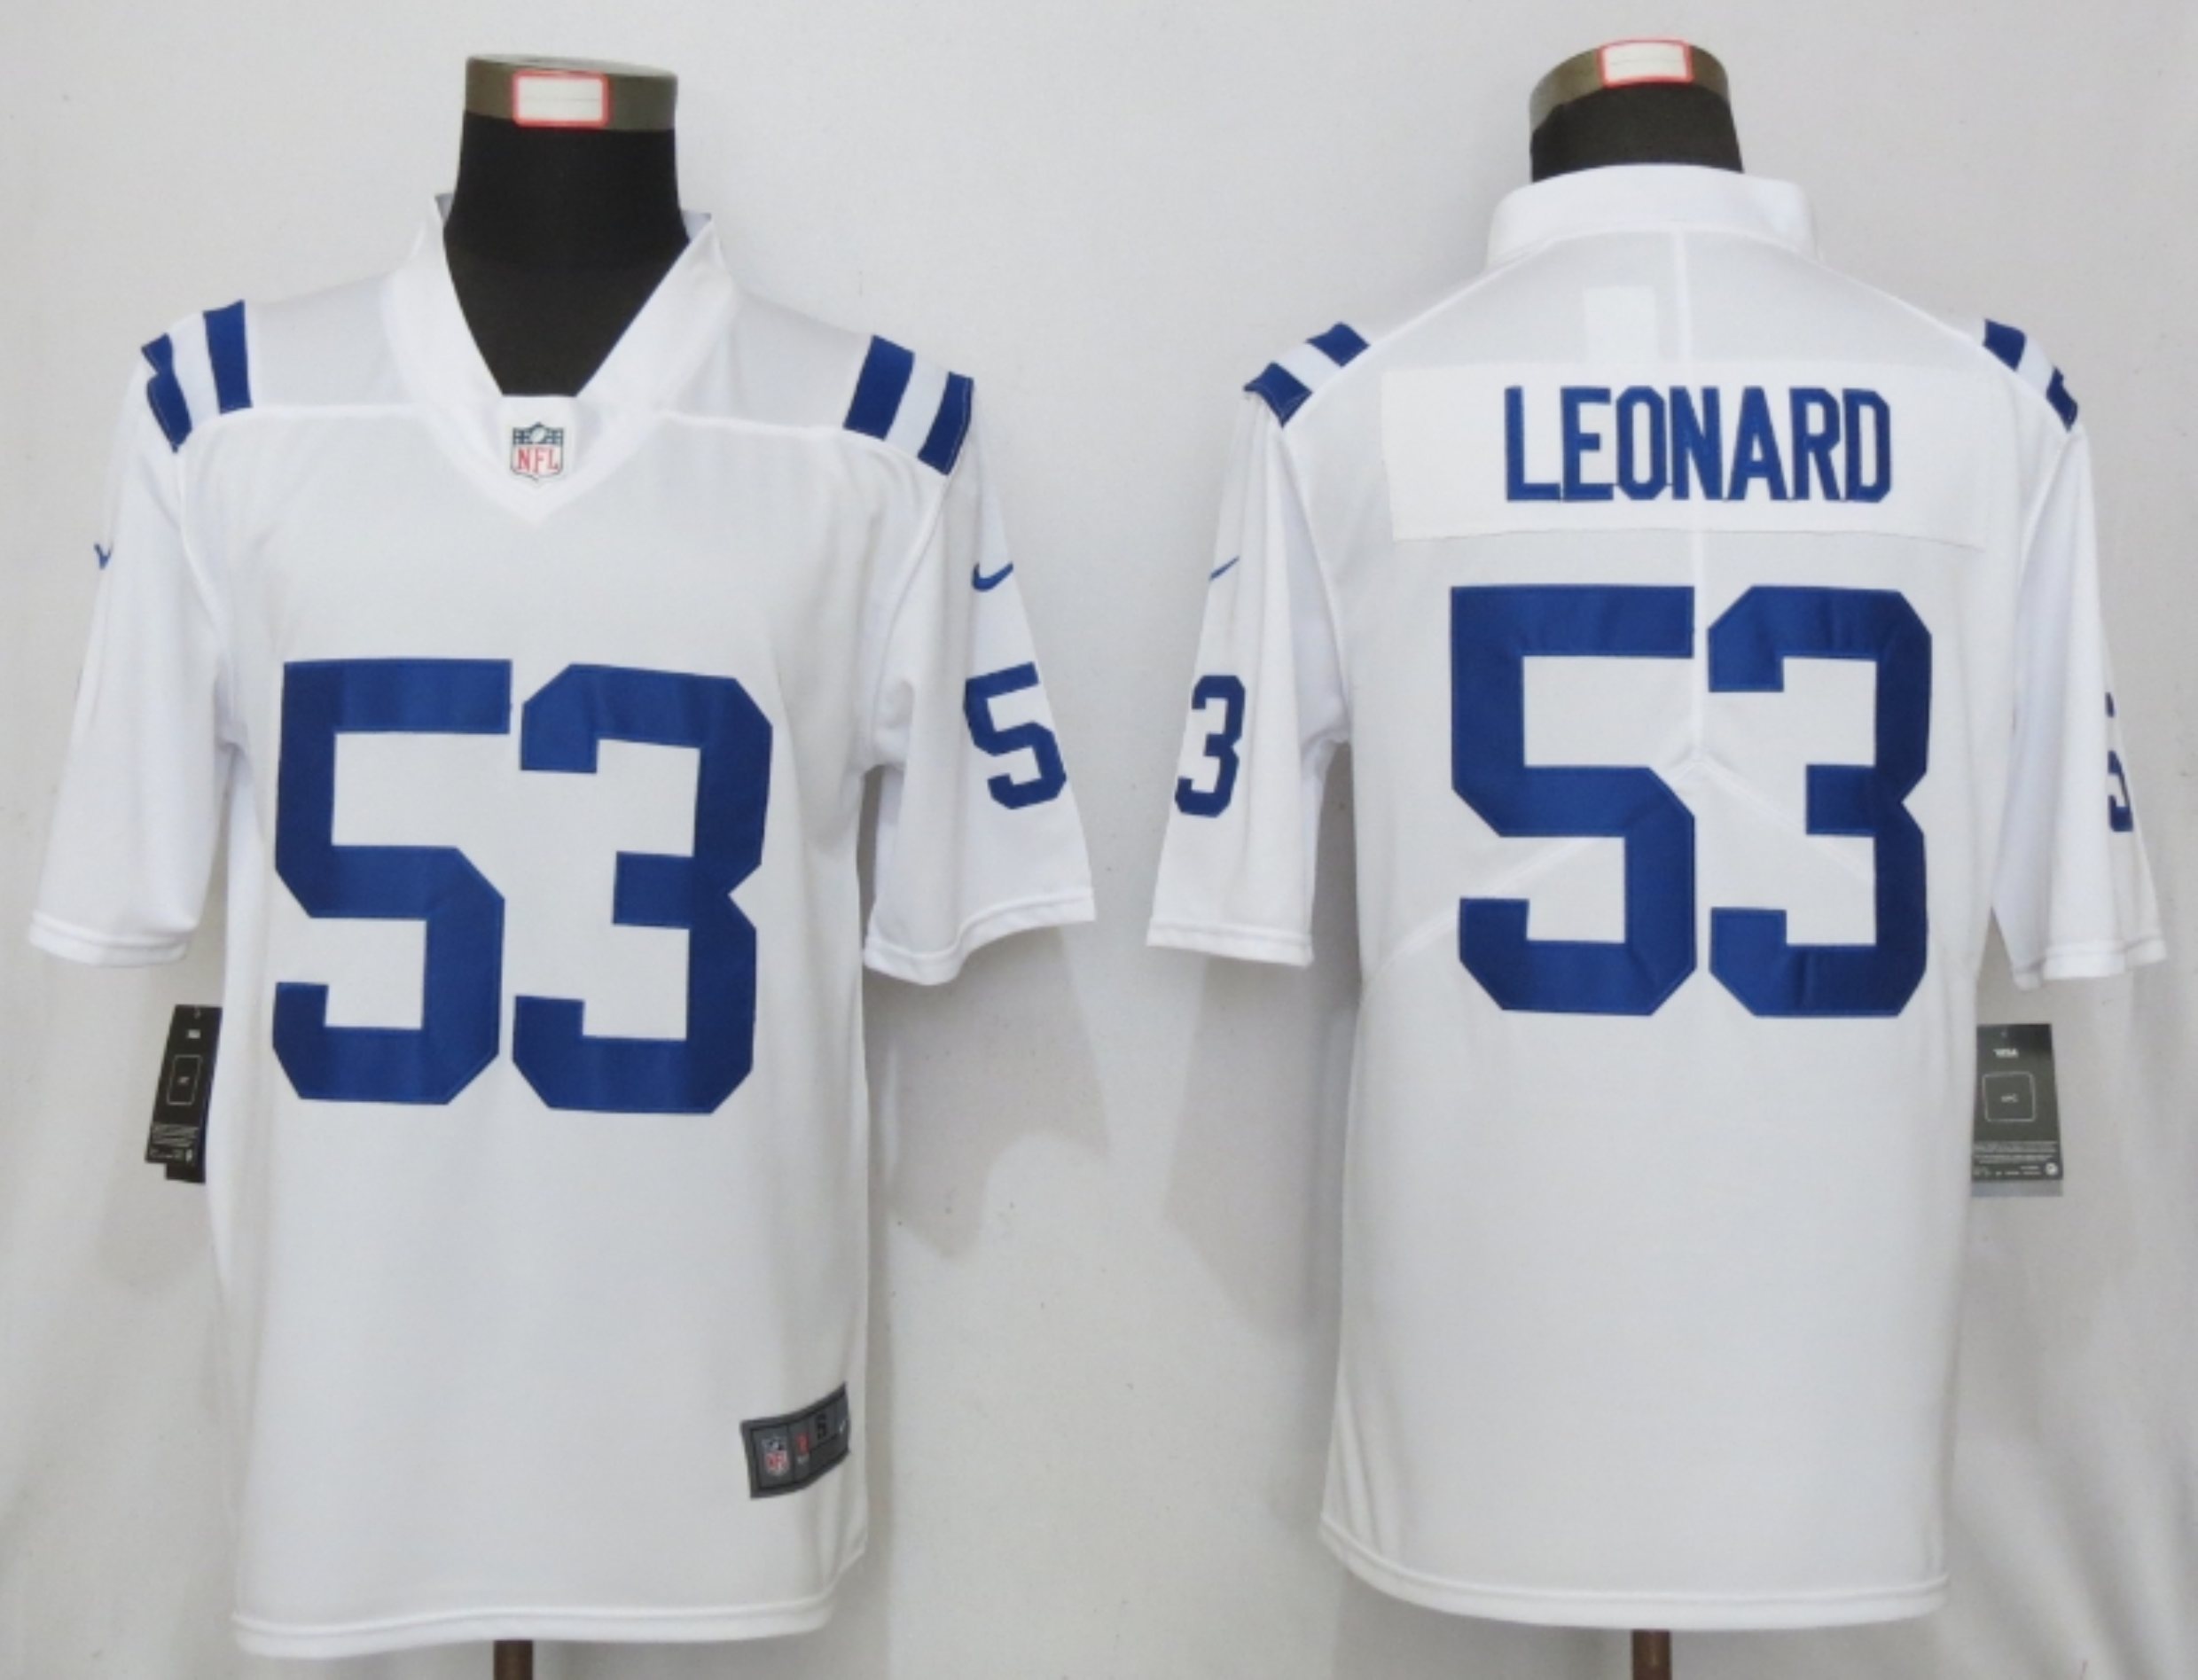 New Nike Indianapolis Colts #53 Leonard White Vapor Limited Jersey